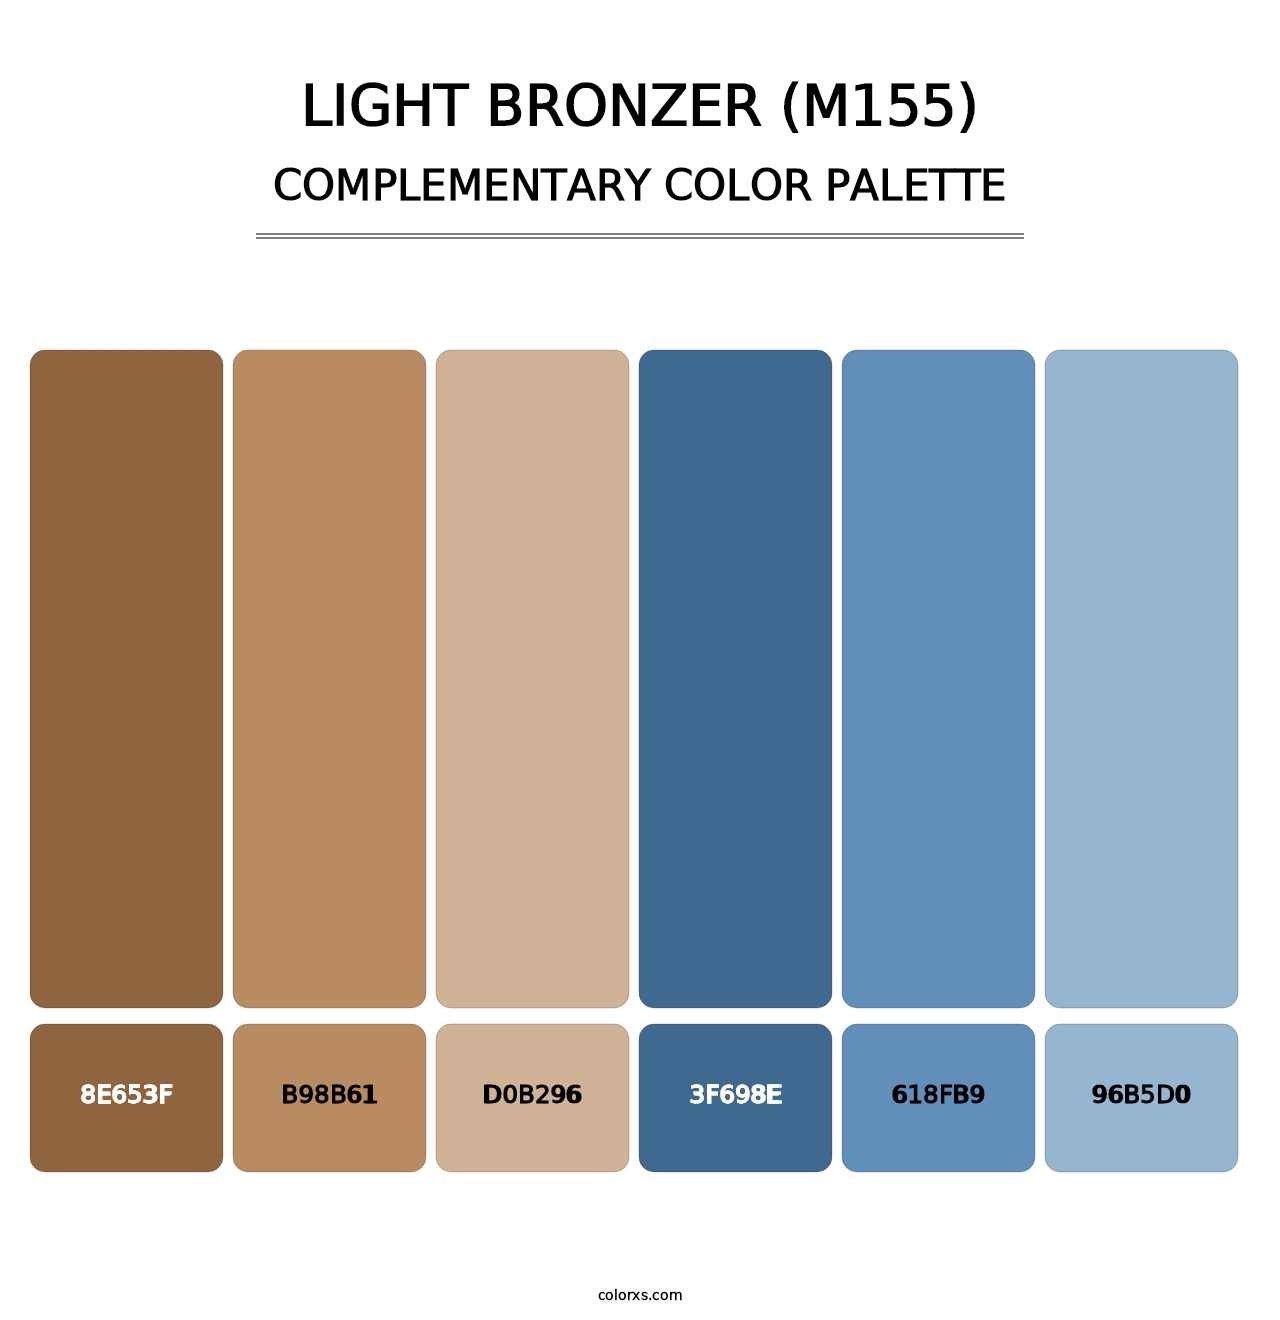 Light Bronzer (M155) - Complementary Color Palette